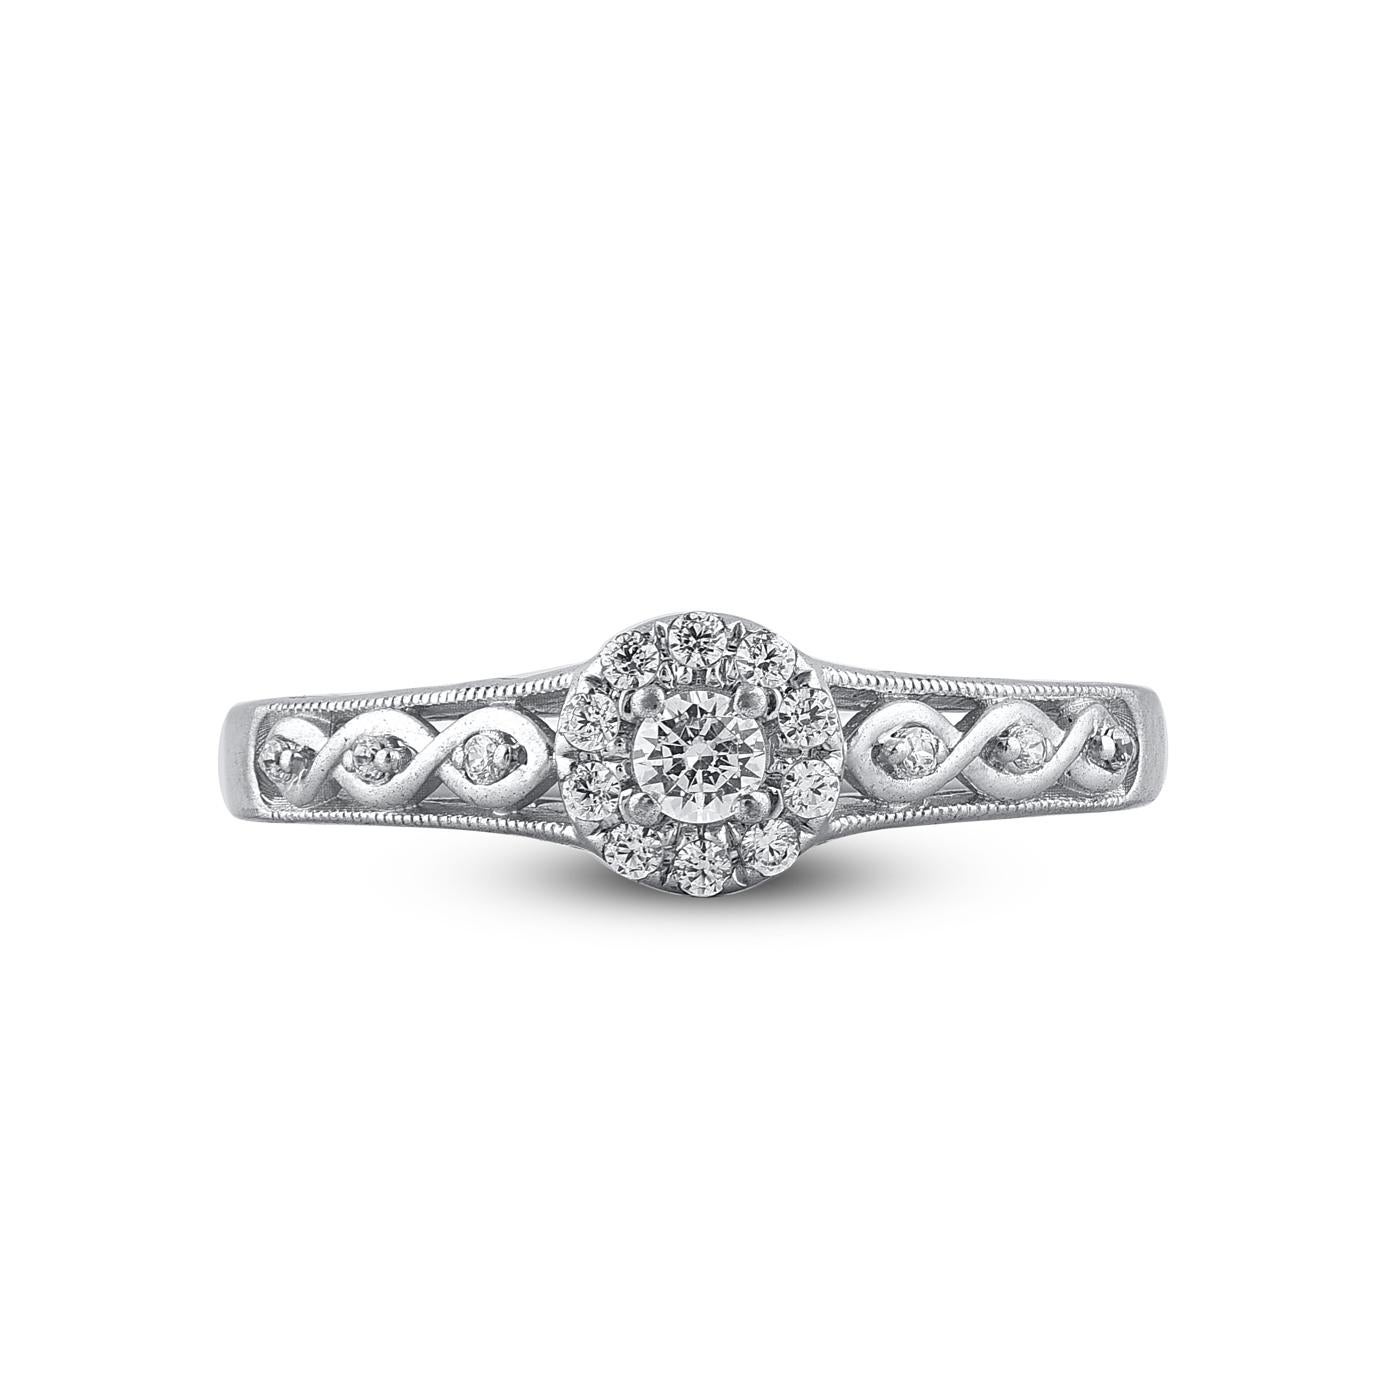 Win her heart with this classic and elegant diamond wedding ring. These diamond ring are studded with 19 single cut and brilliant cut round diamonds in prong and flush setting and crafted in 14kt white gold. The white diamonds are graded as H-I